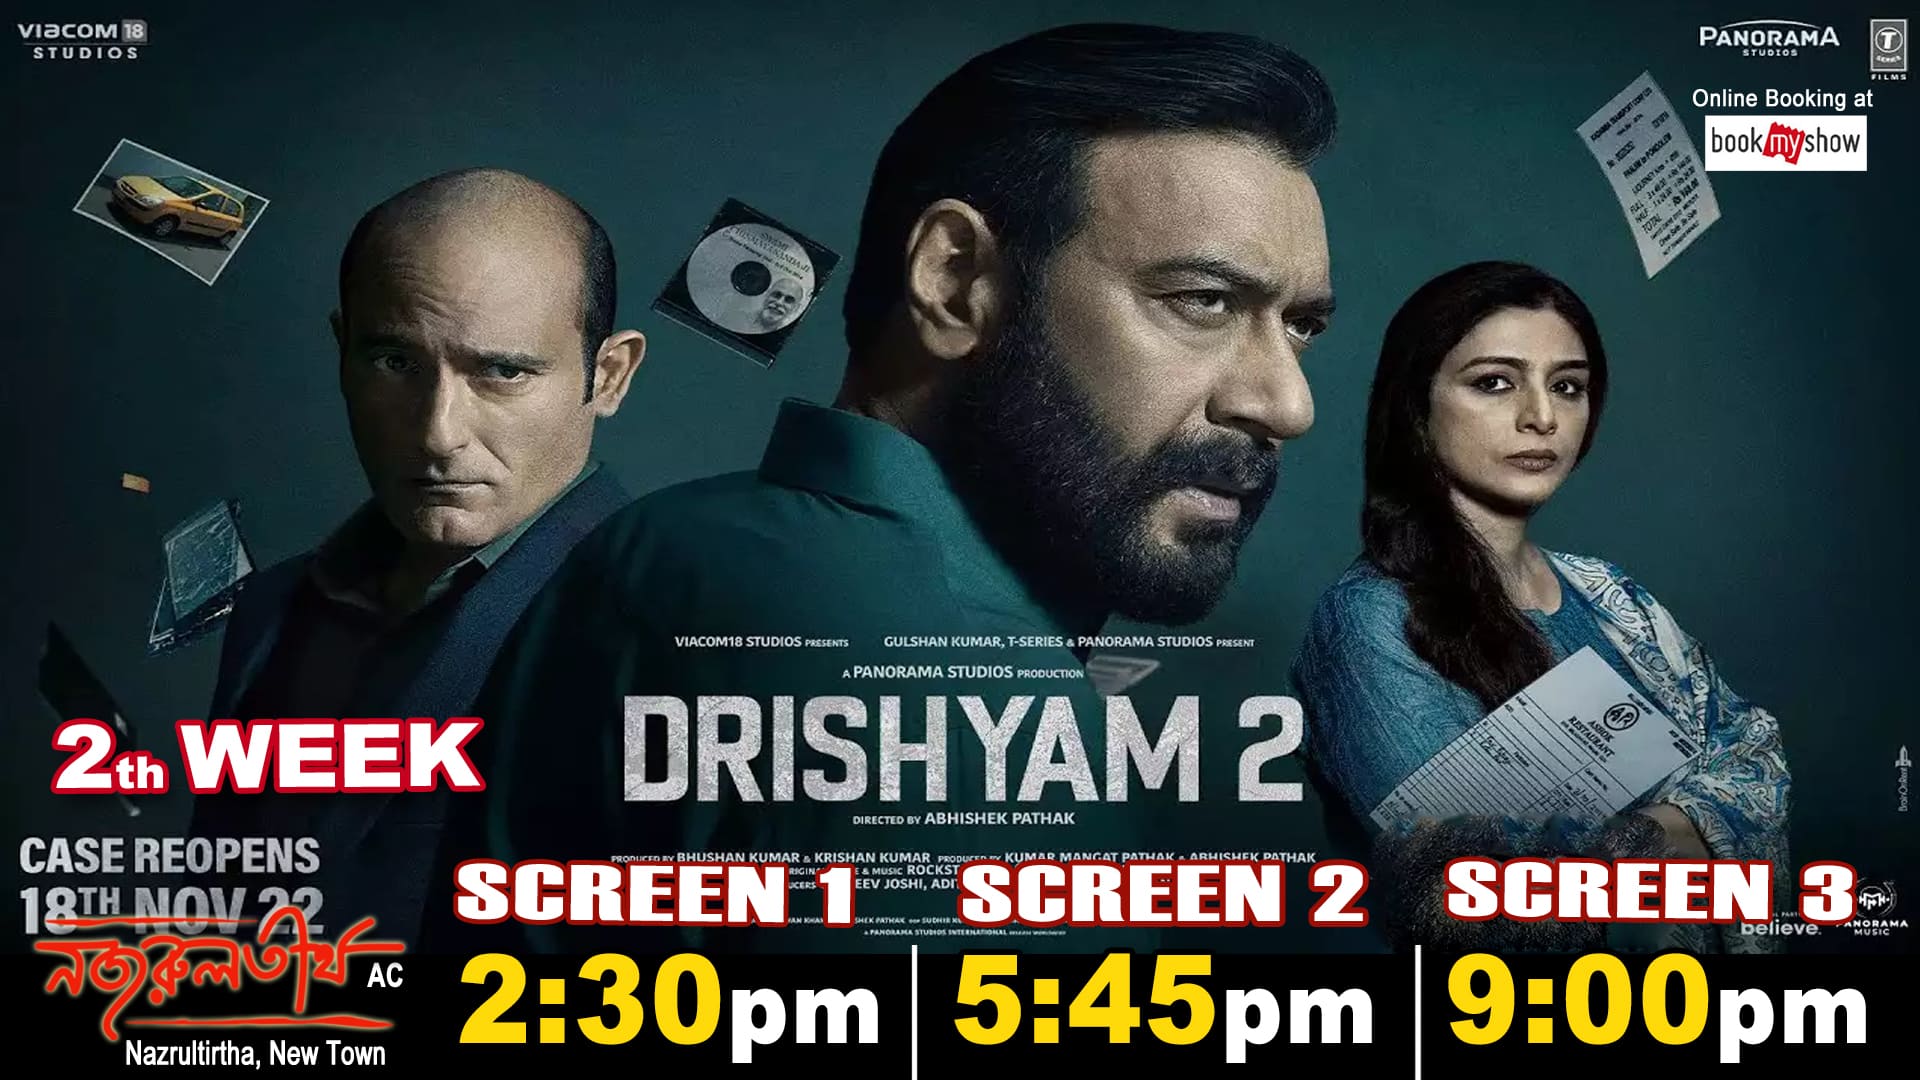 http://nazrultirtha.co.in/upload_file/upcoming_events/DRISHYAM 2 